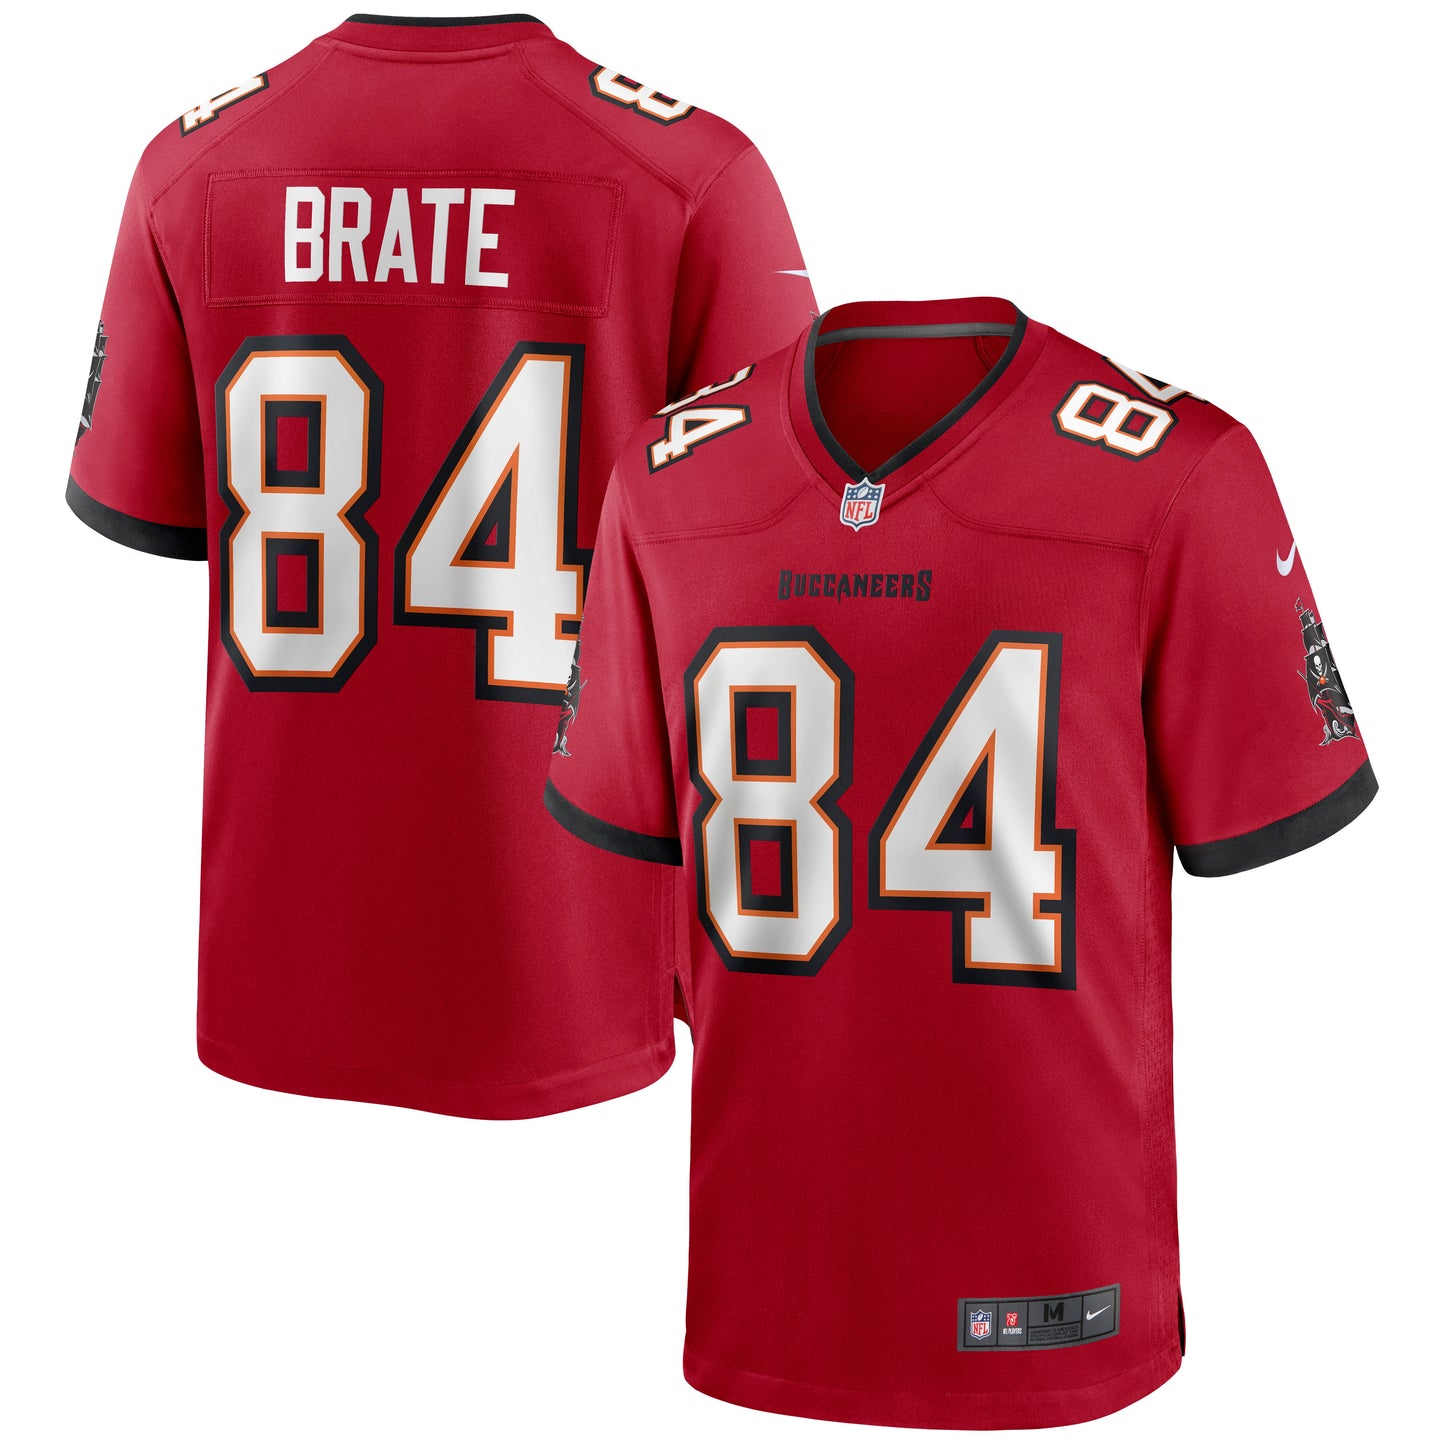 Cameron Brate Tampa Bay Buccaneers Nike Game Jersey - Red